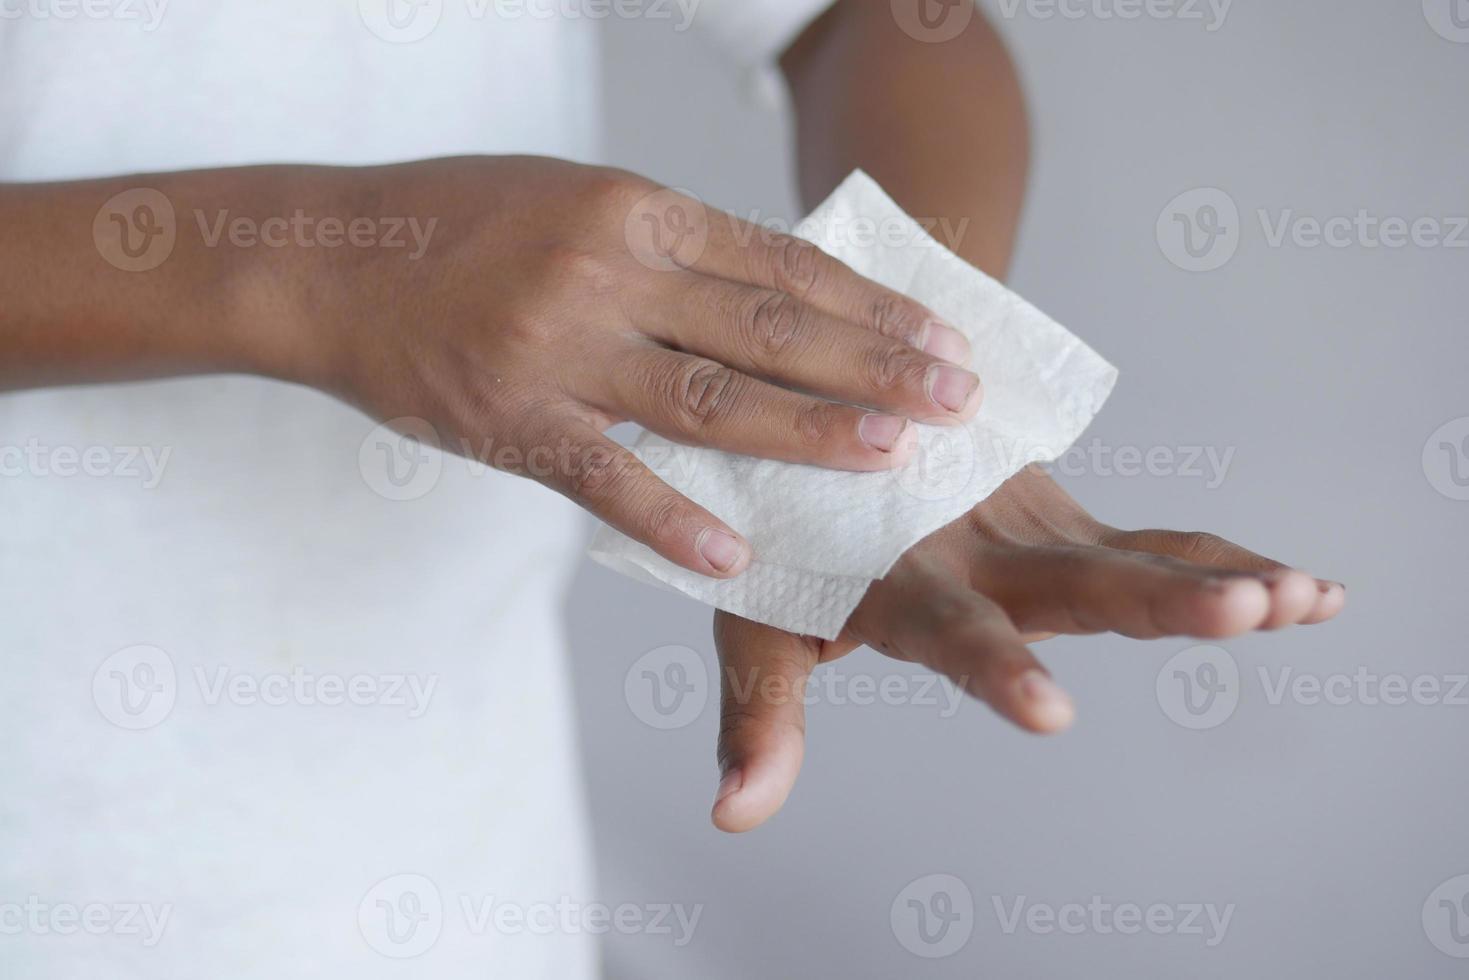 man disinfecting his hands with a wet wipe. photo